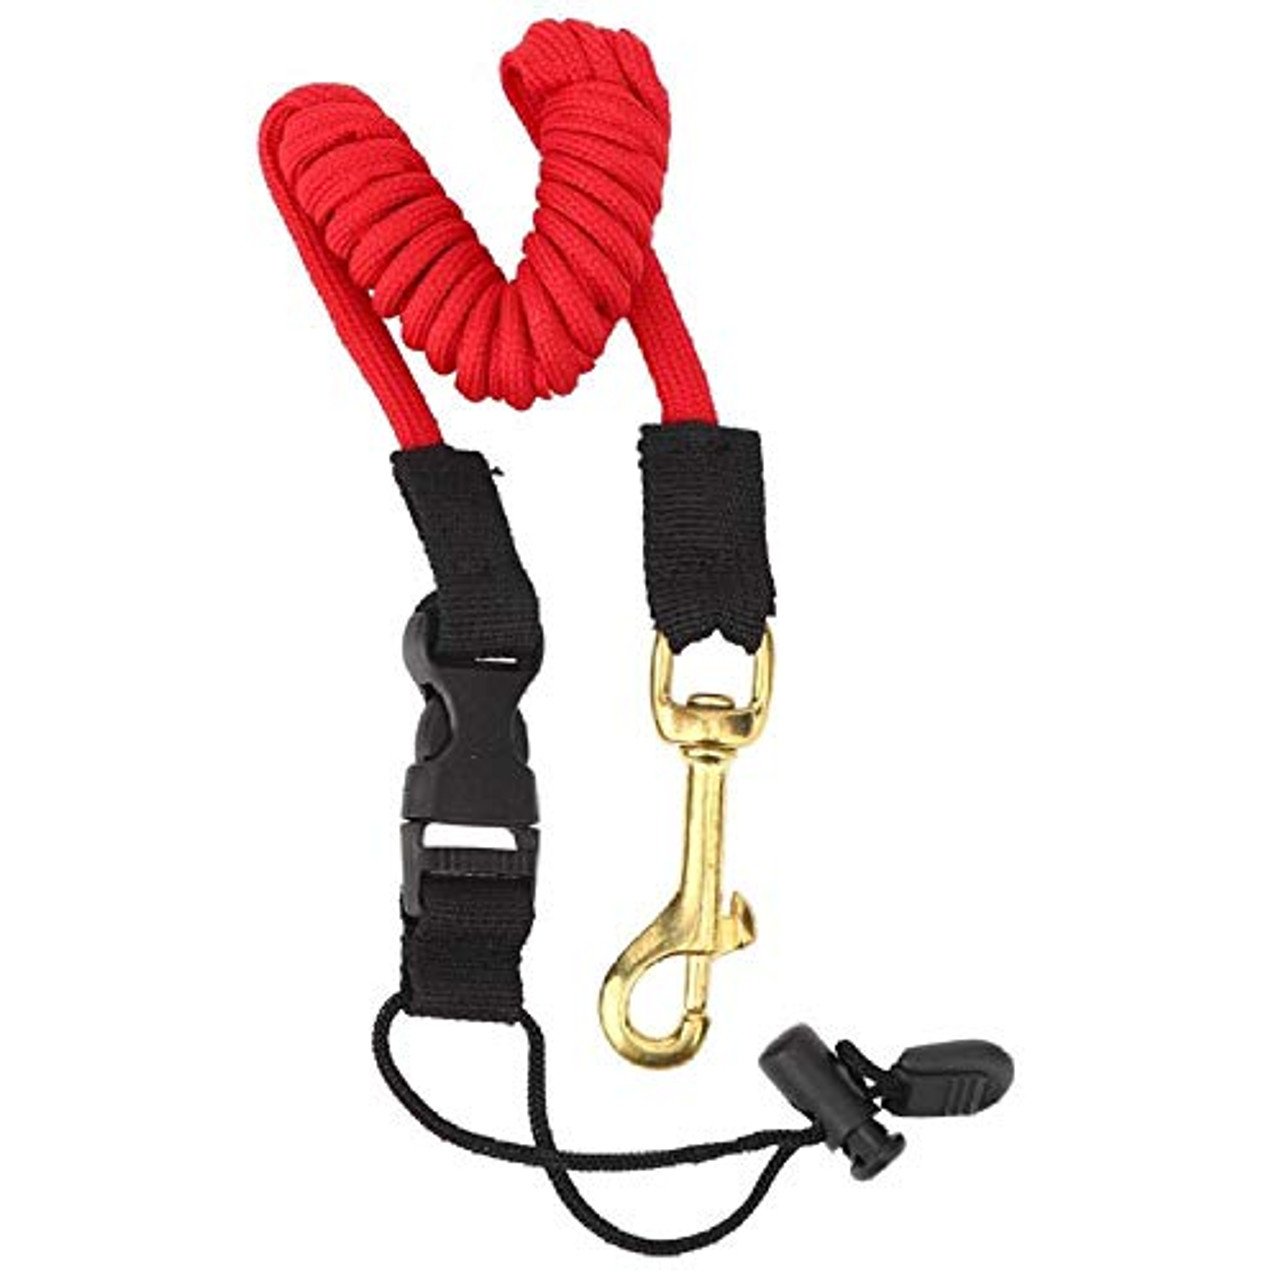 Kayak Paddle Leash Tied Rope Surfing Belt Towbar Traction Safety Lanyard Cord US 